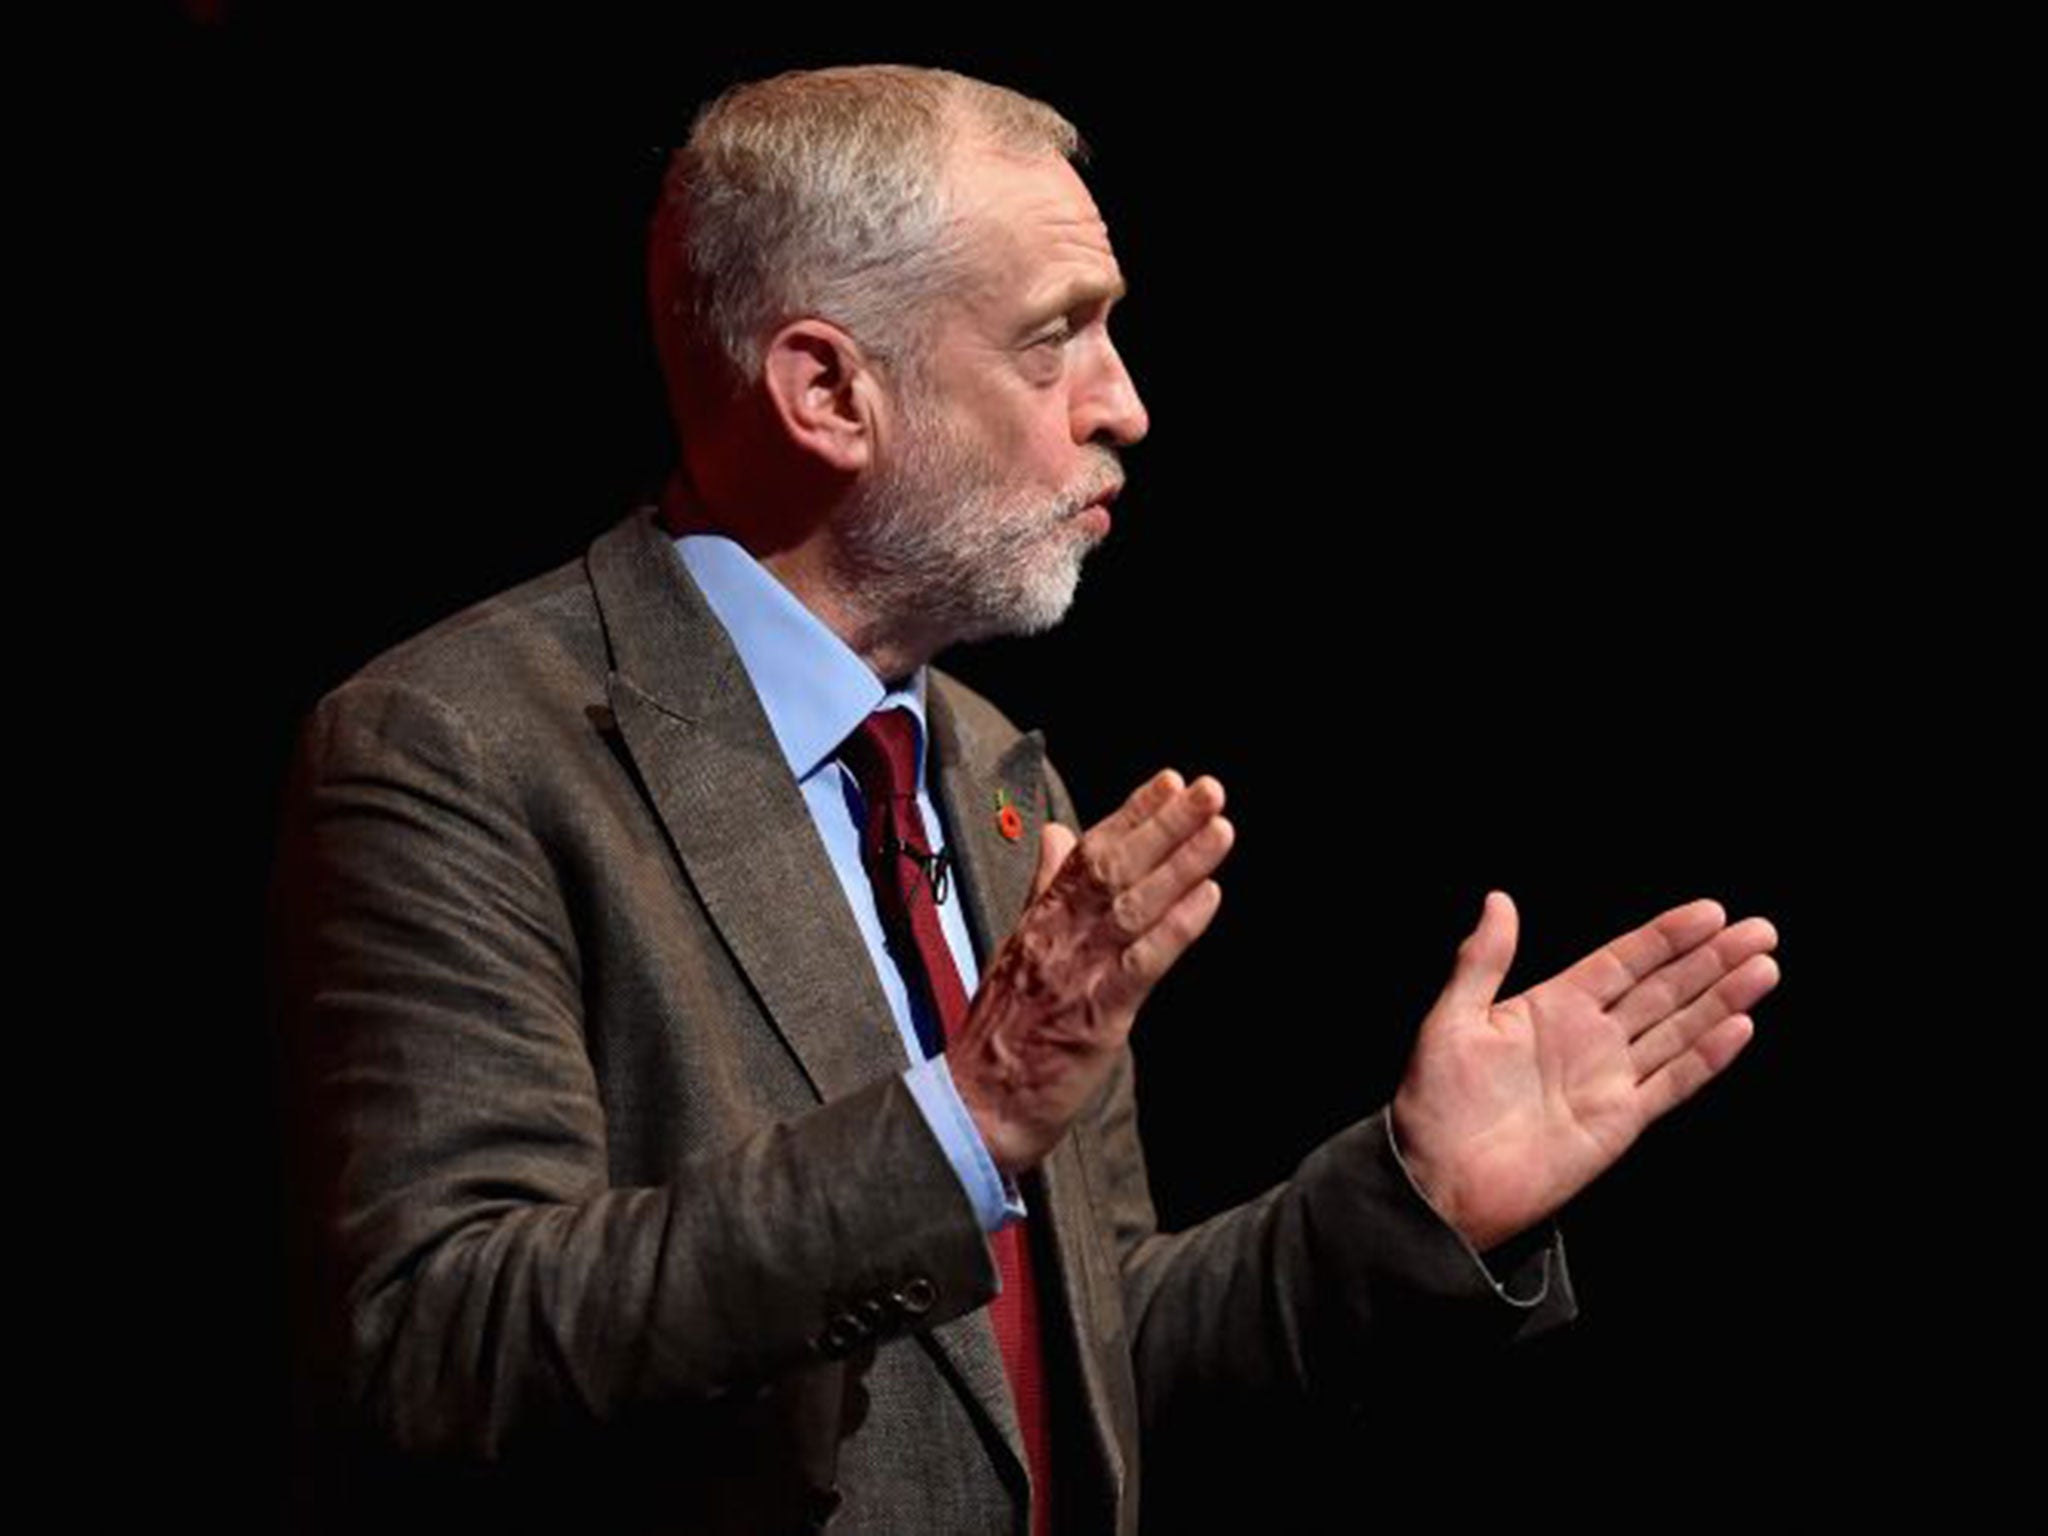 Jeremy Corbyn is challenging David Cameron to take part in an annual, televised “state of the nation” debate